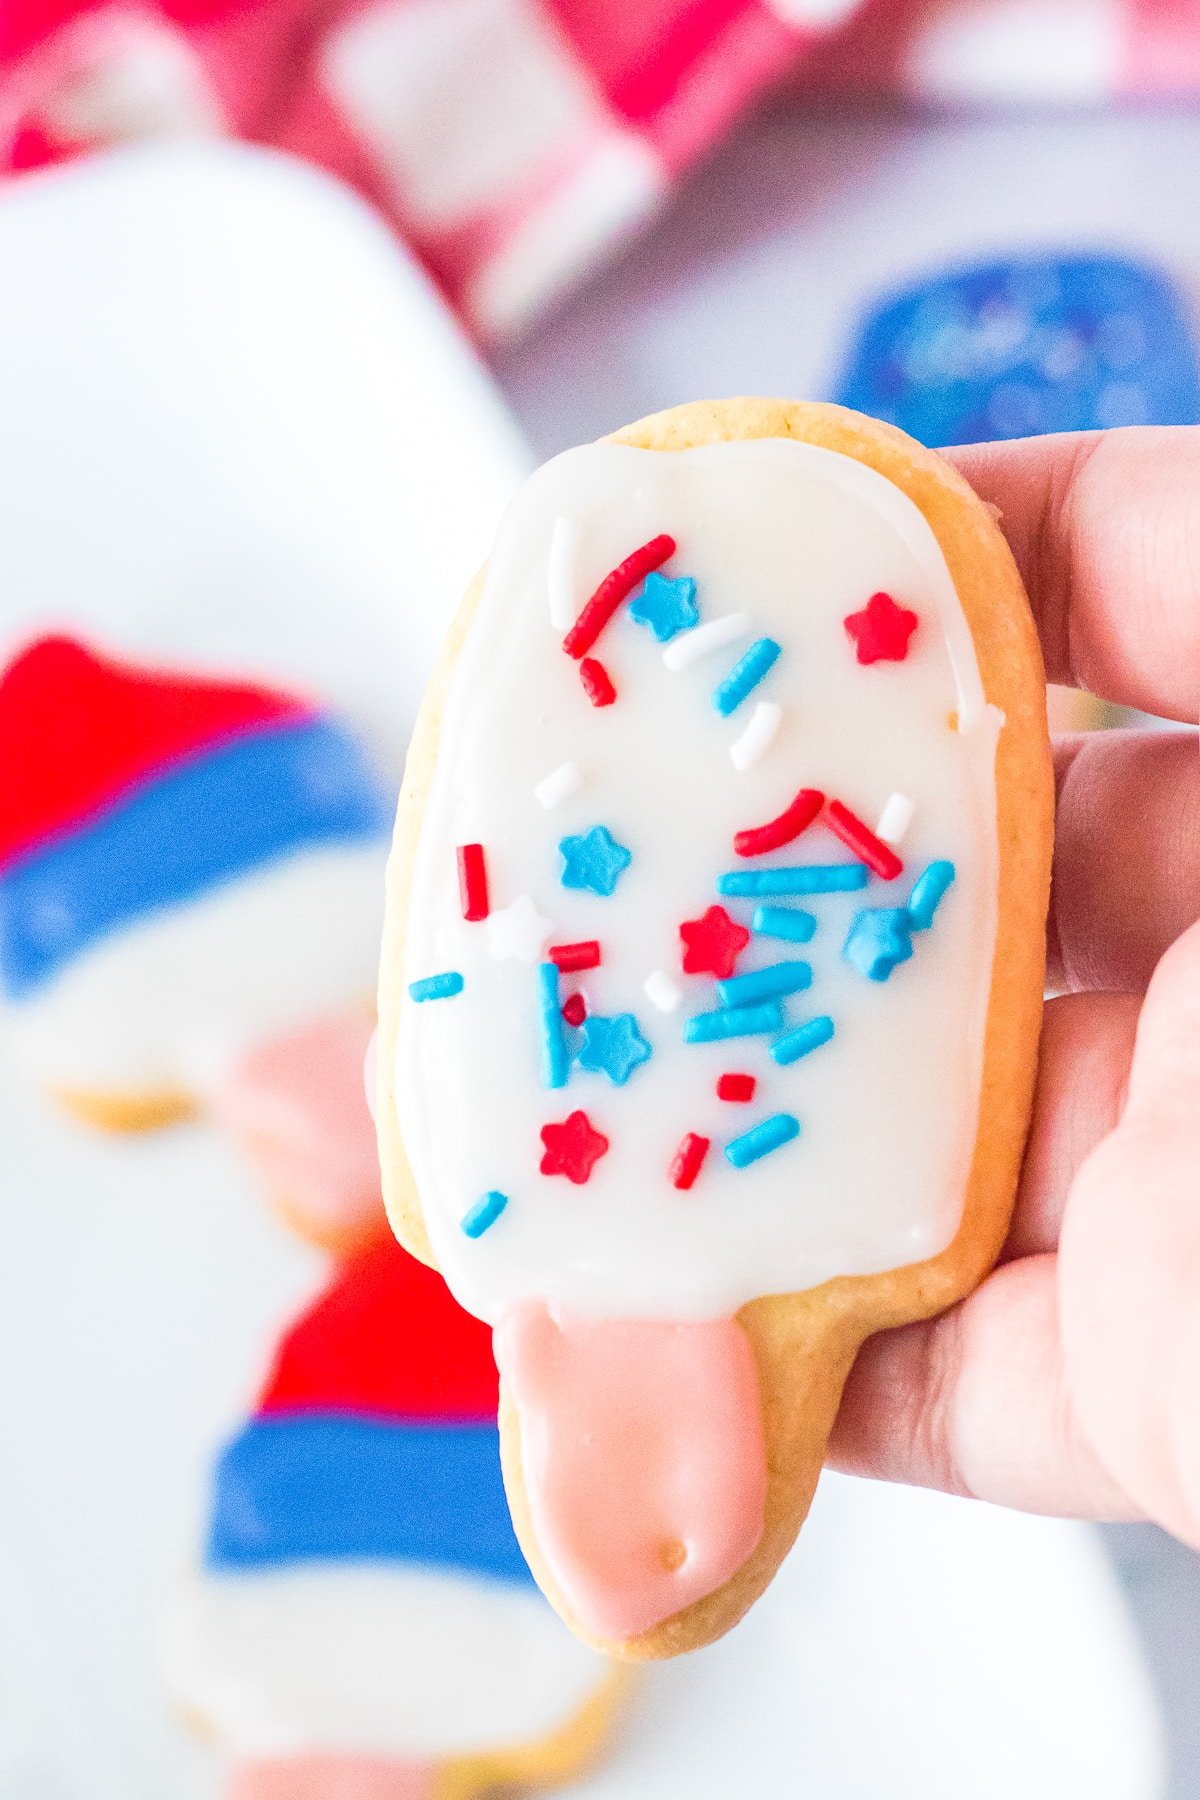 a hand holding up Cut Out Sugar Cookies Recipe in air